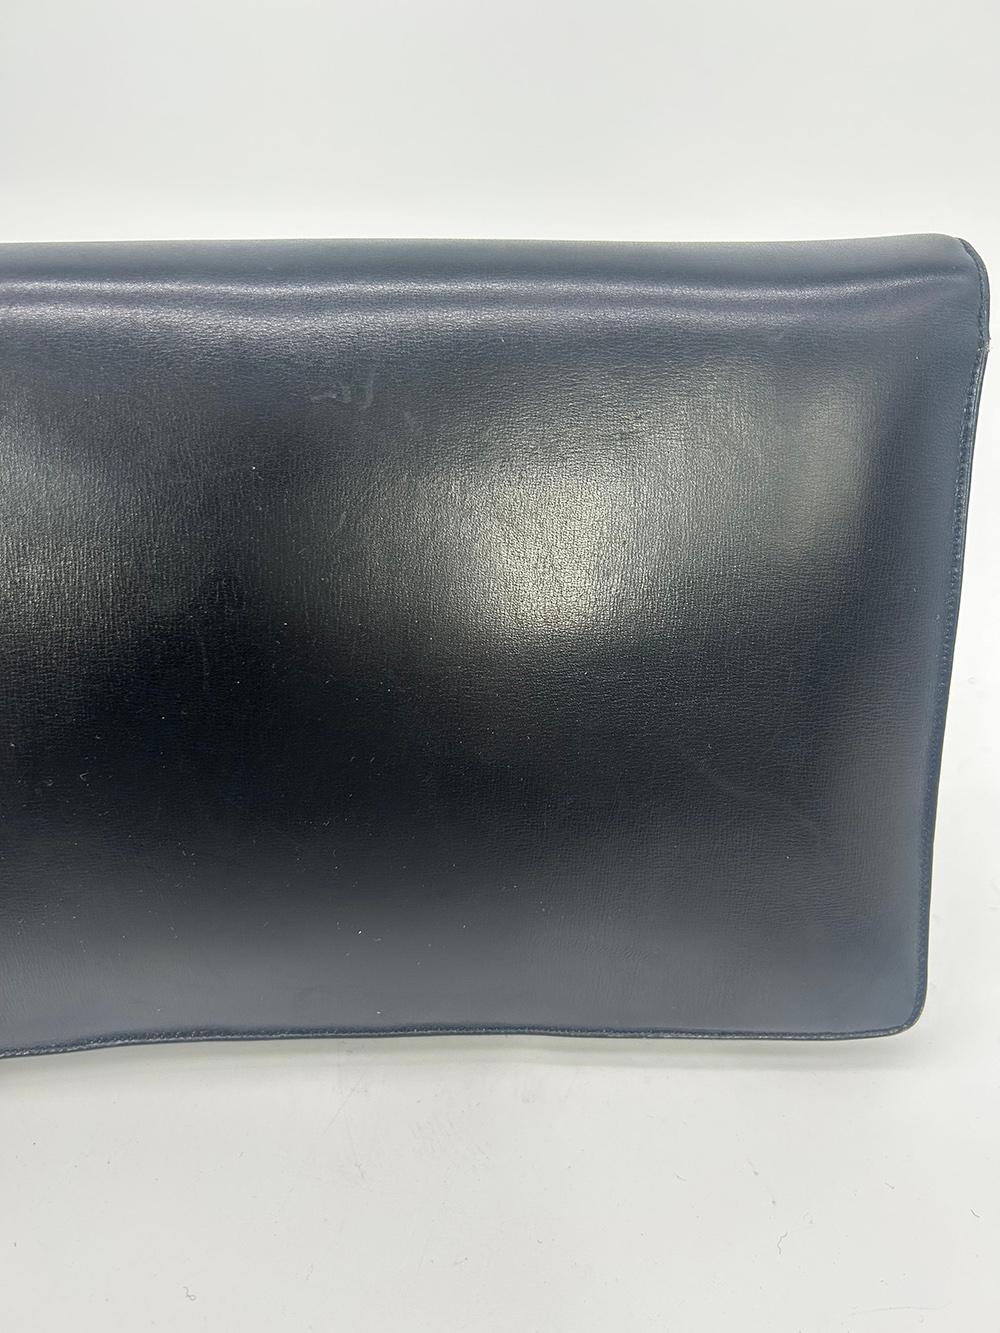 Vintage Judith Leiber Black Box Calf Leather Clutch For Sale 4